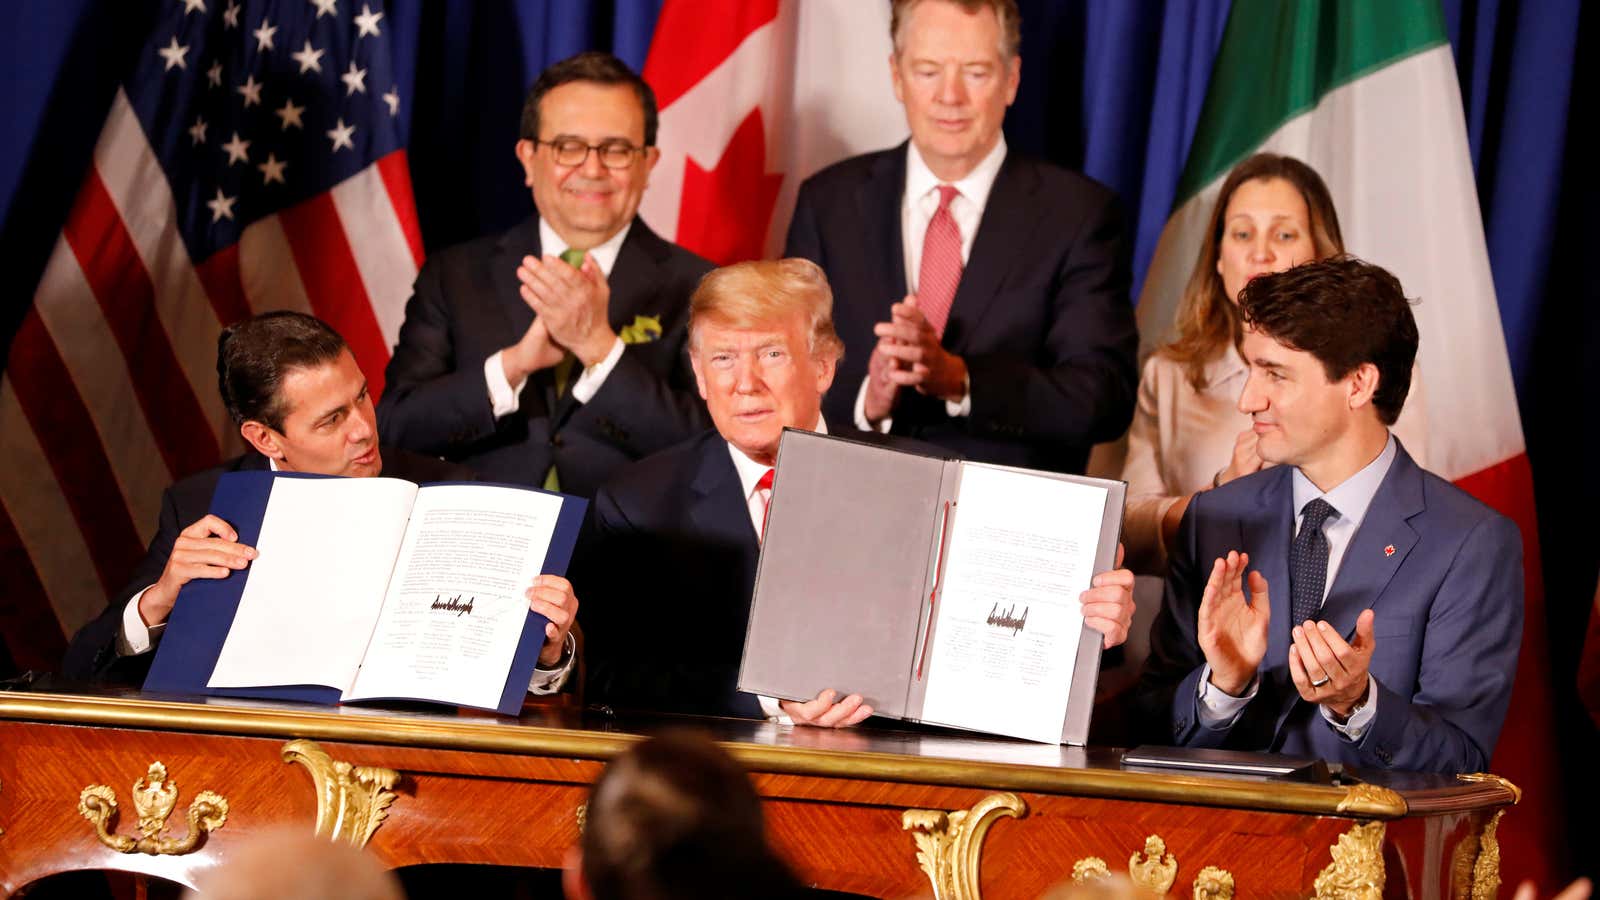 US President Donald Trump, Mexico’s President Enrique Pena Nieto and Canada’s Prime Minister Justin Trudeau attend the USMCA signing ceremony before the G20 leaders summit in Buenos Aires.